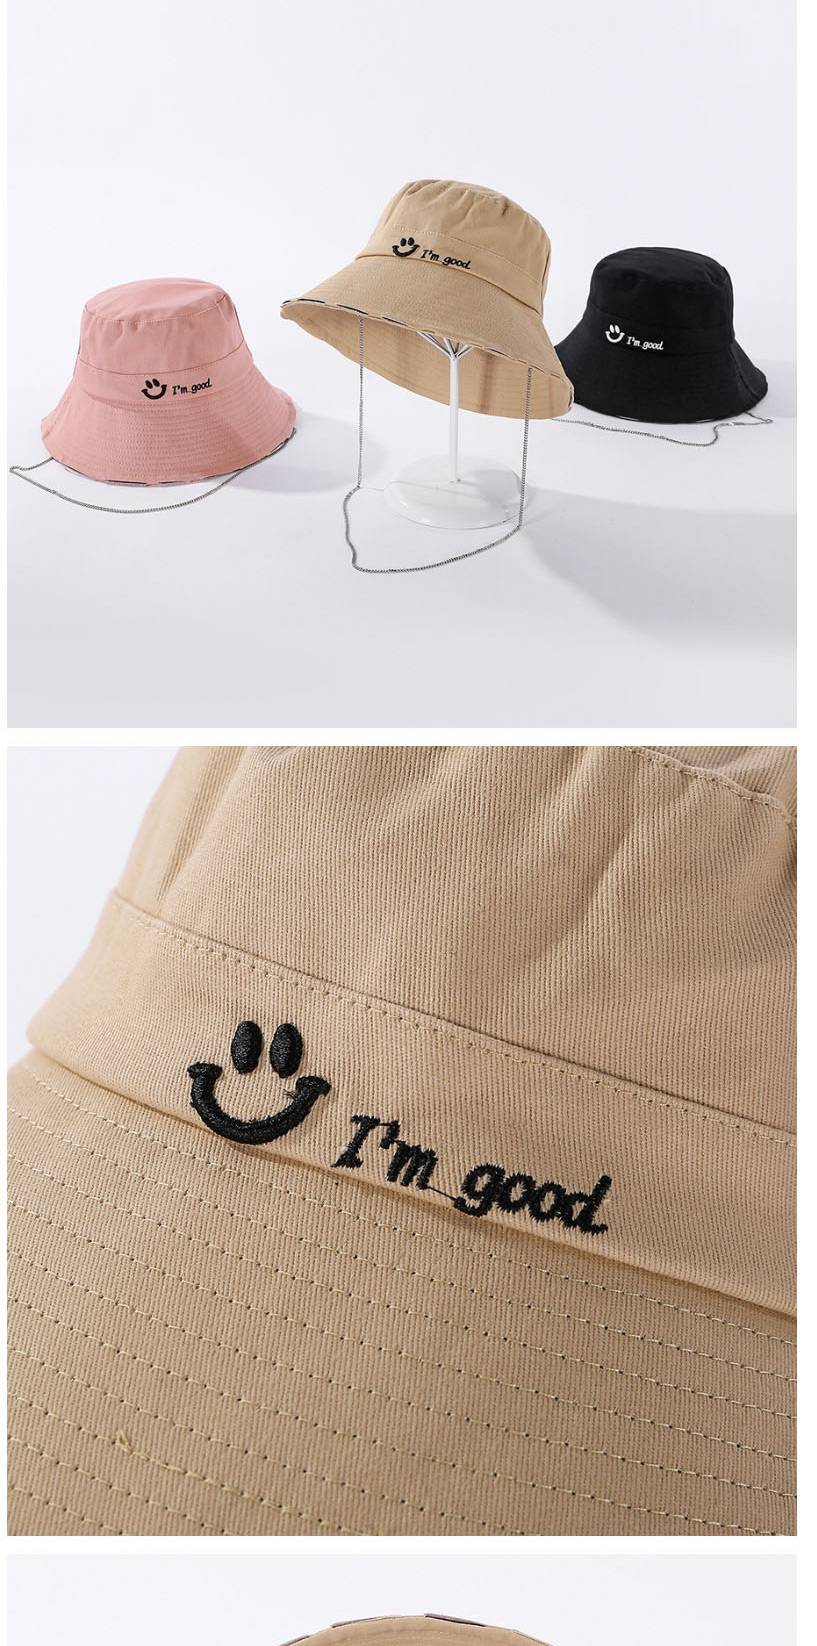 Fashion Pink Smiley Embroidered Wide-brimmed Chain Fisherman Hat,Sun Hats